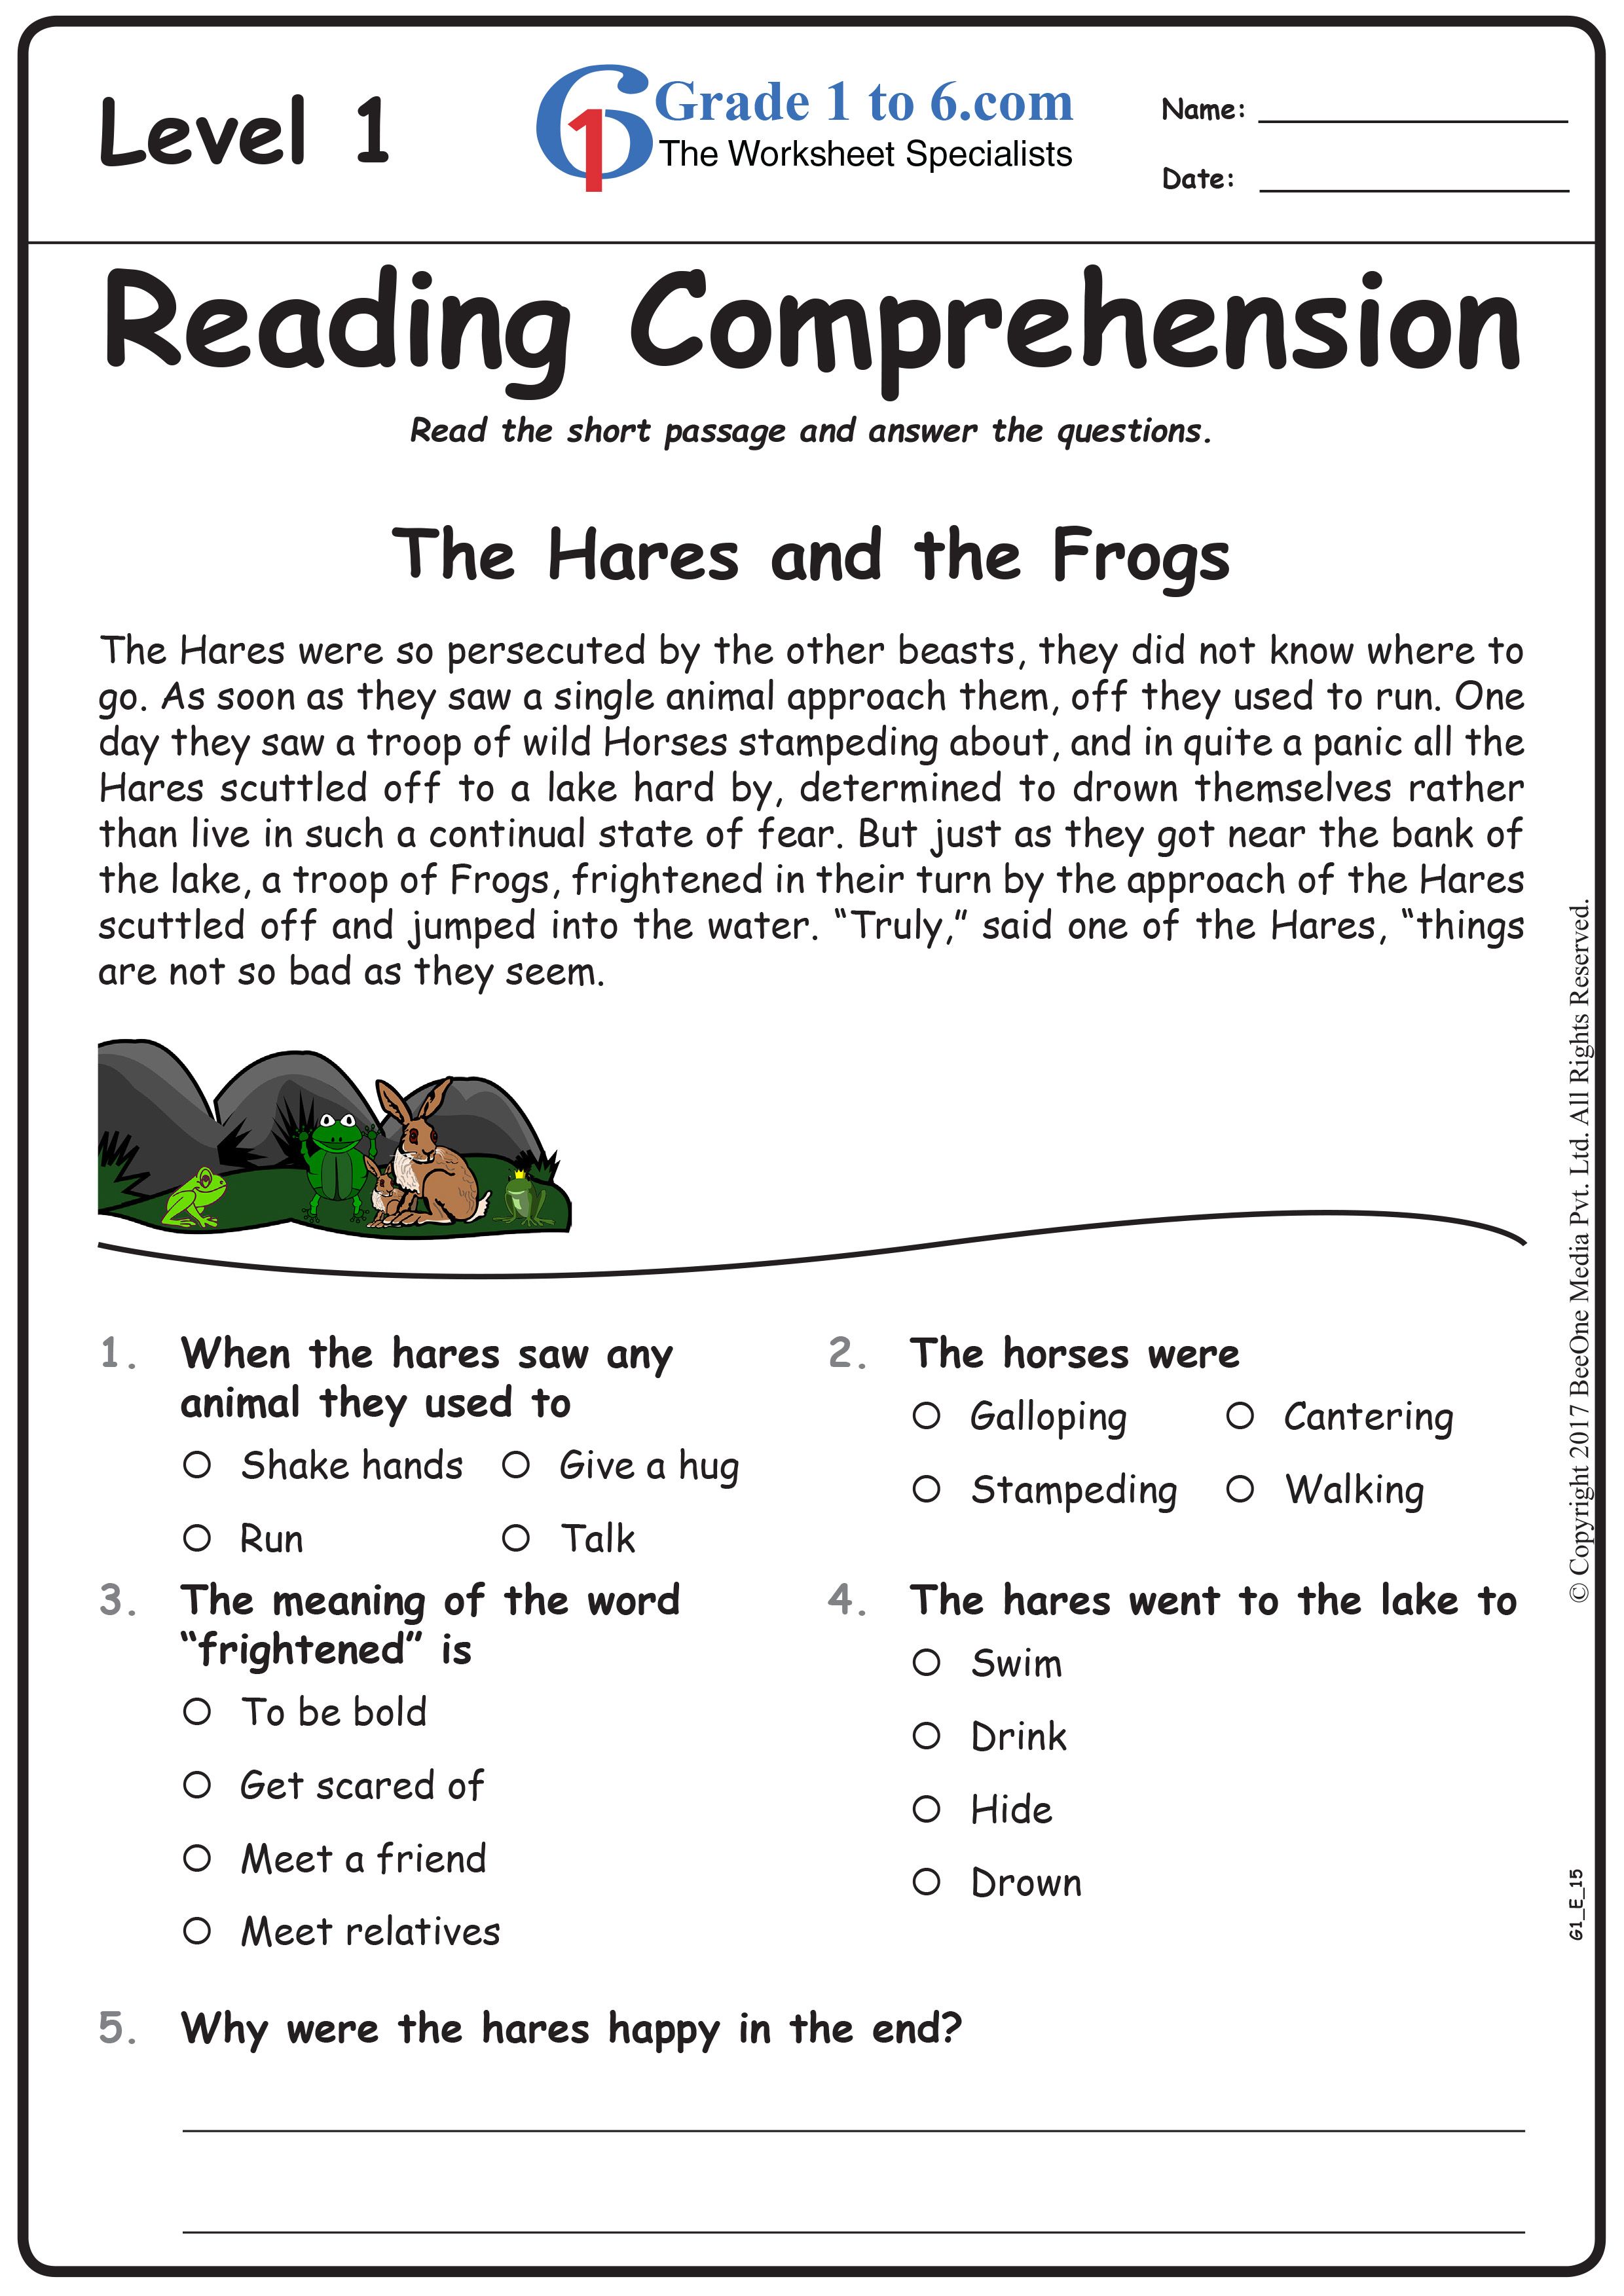 reading comprehension websites for middle school students